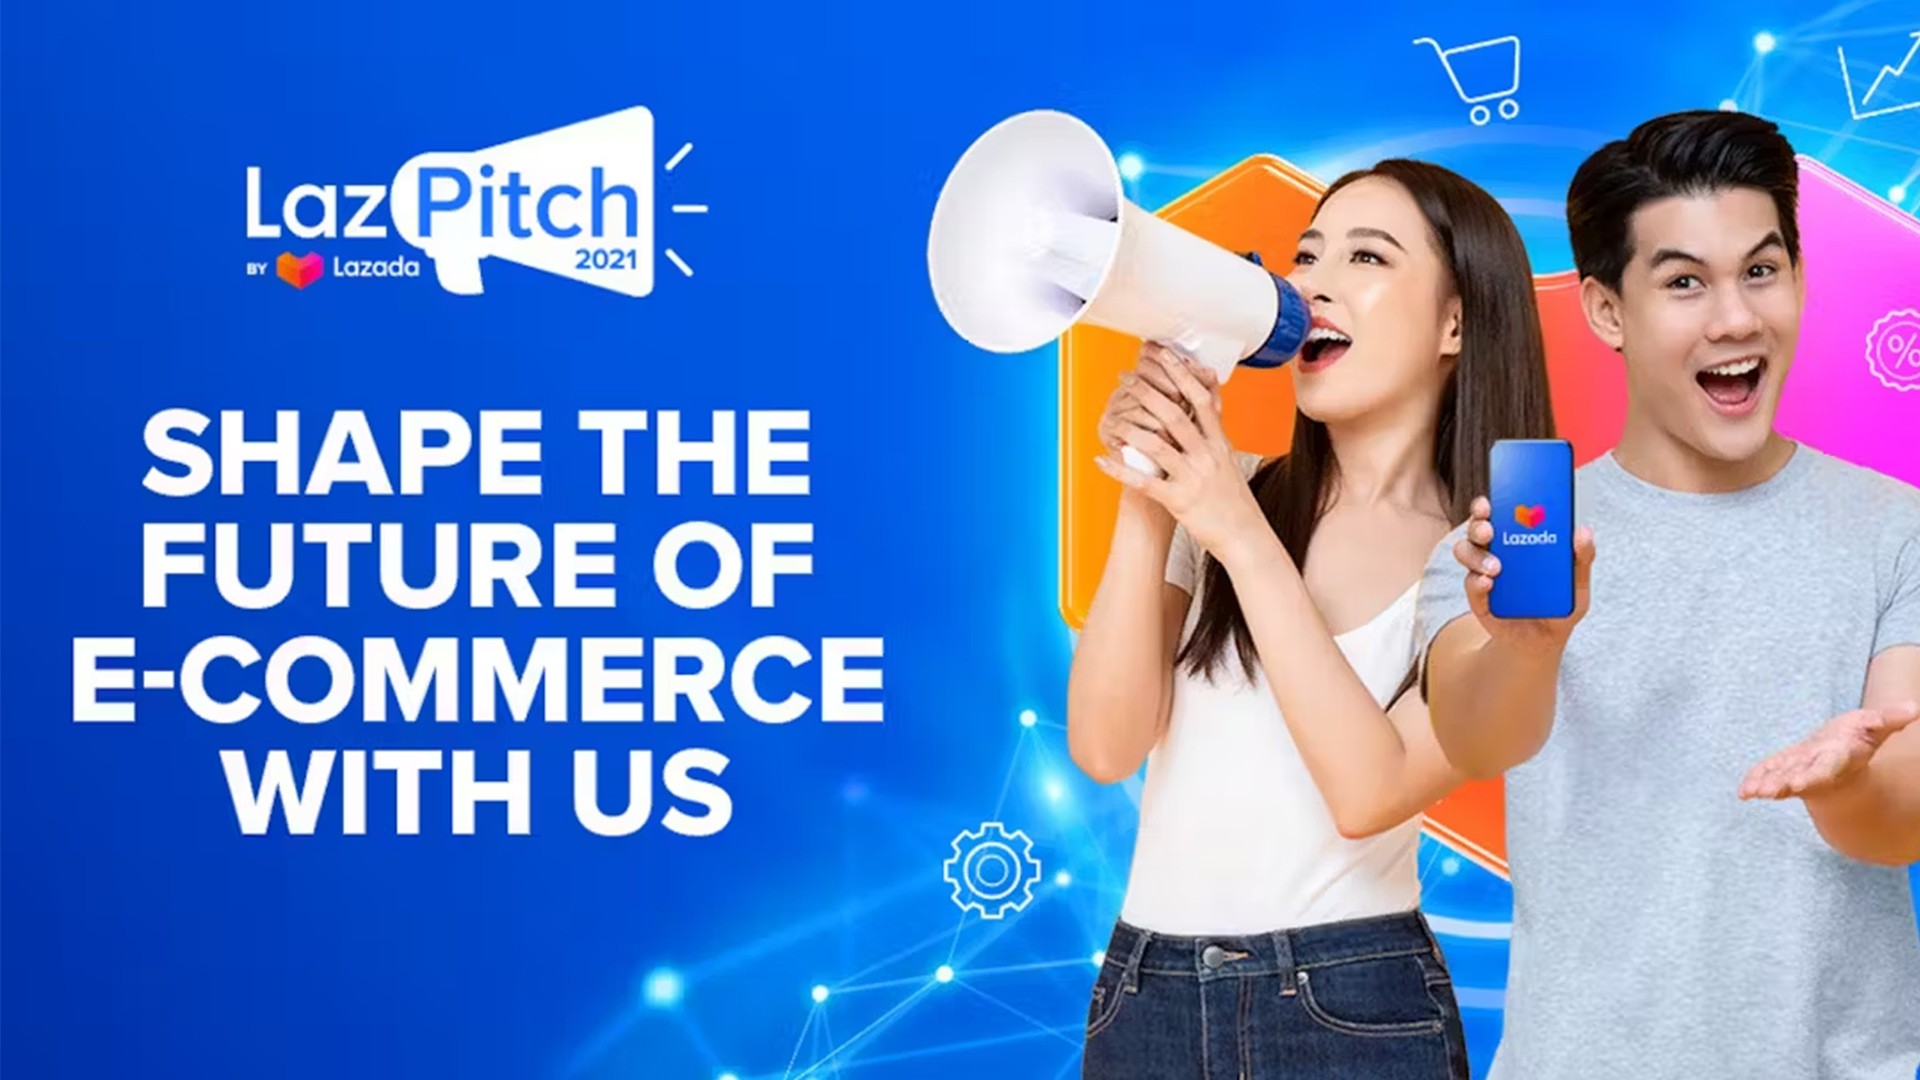 Lazada launches ‘Lazpitch’ talent hunt in Singapore